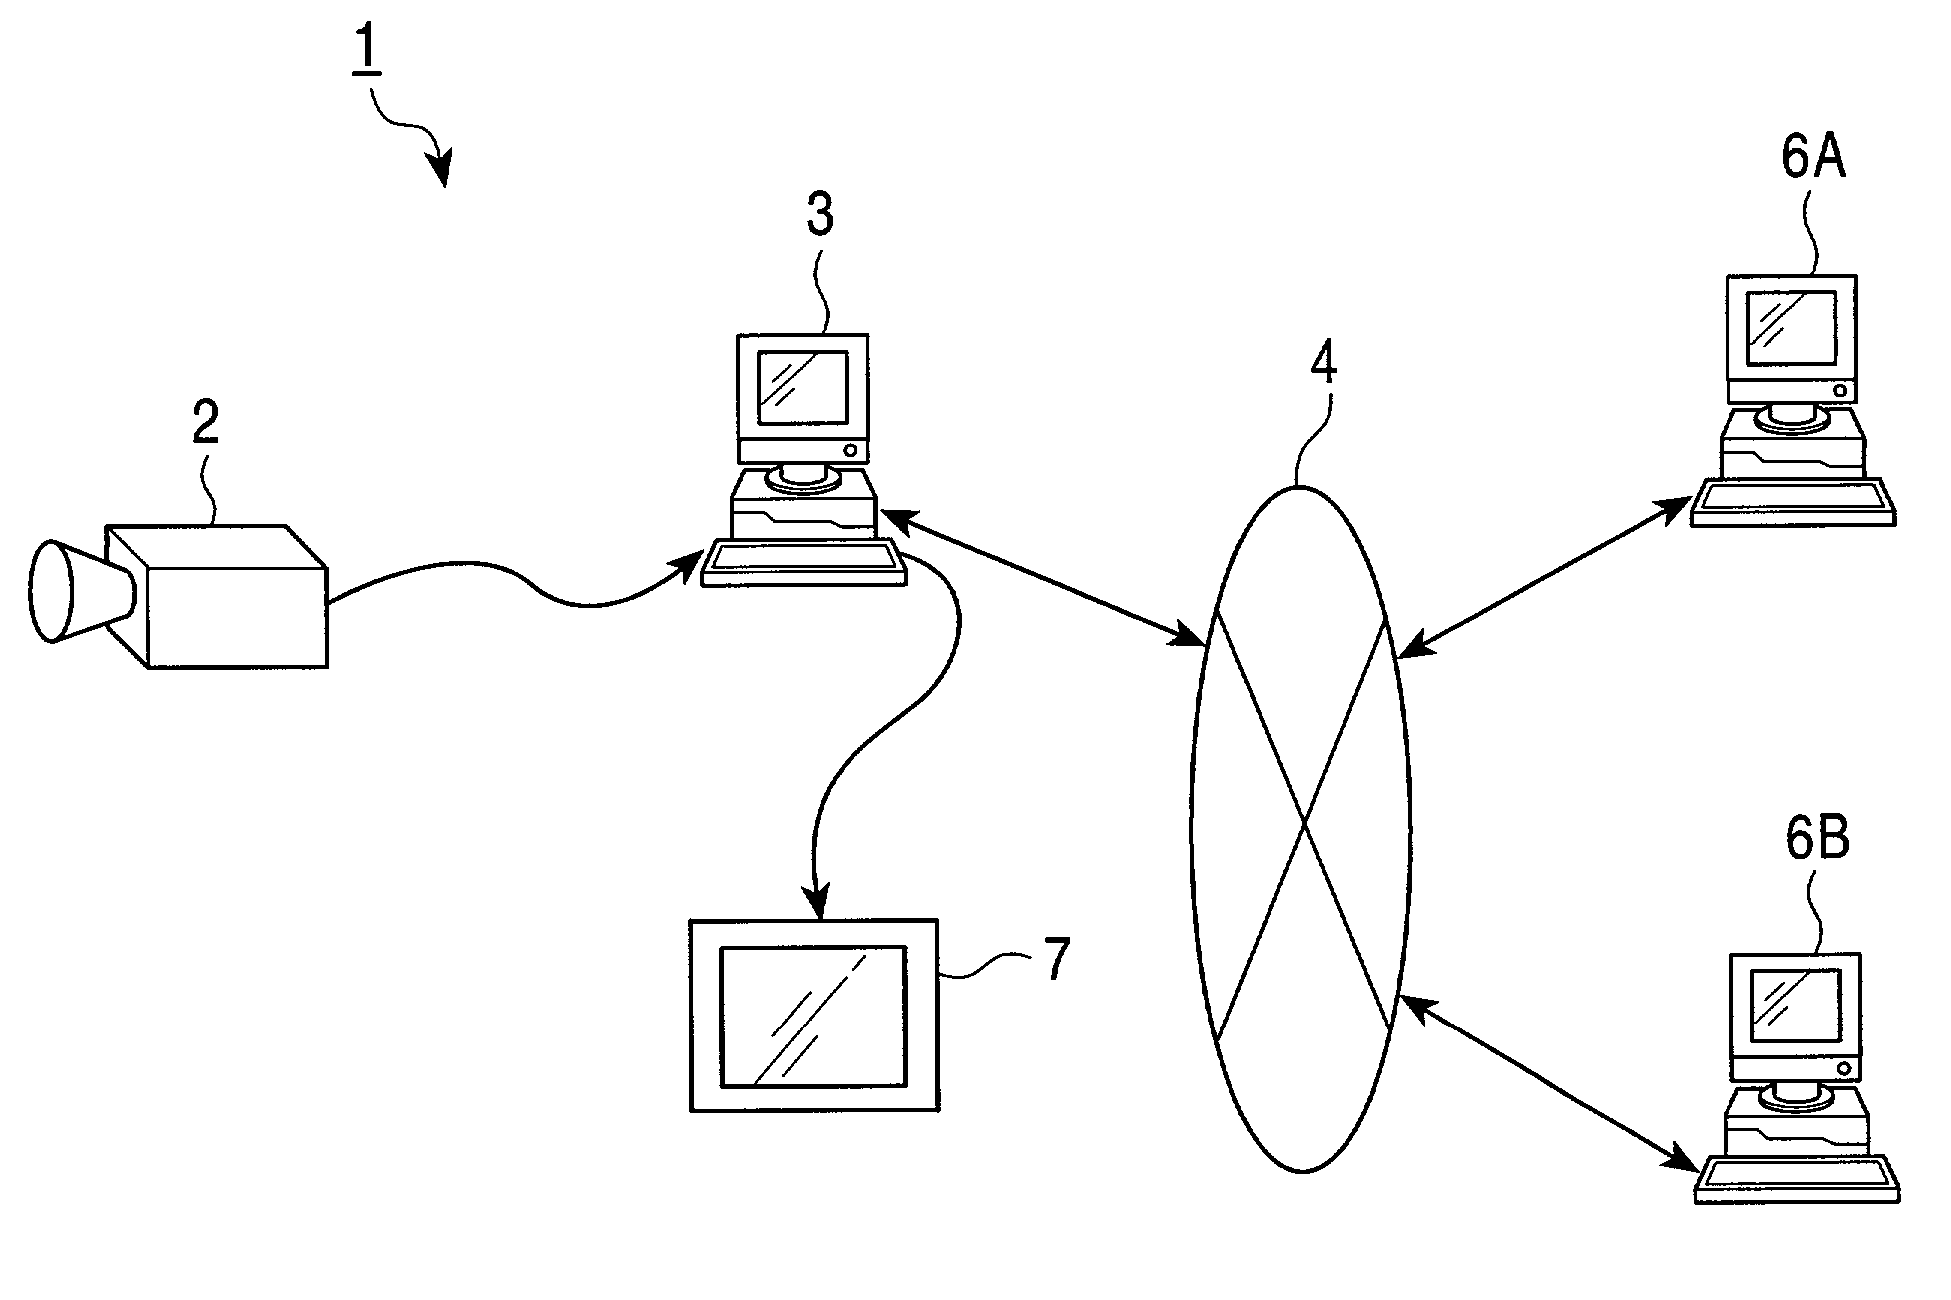 Content provision system and associated methodology of controlling distribution of content